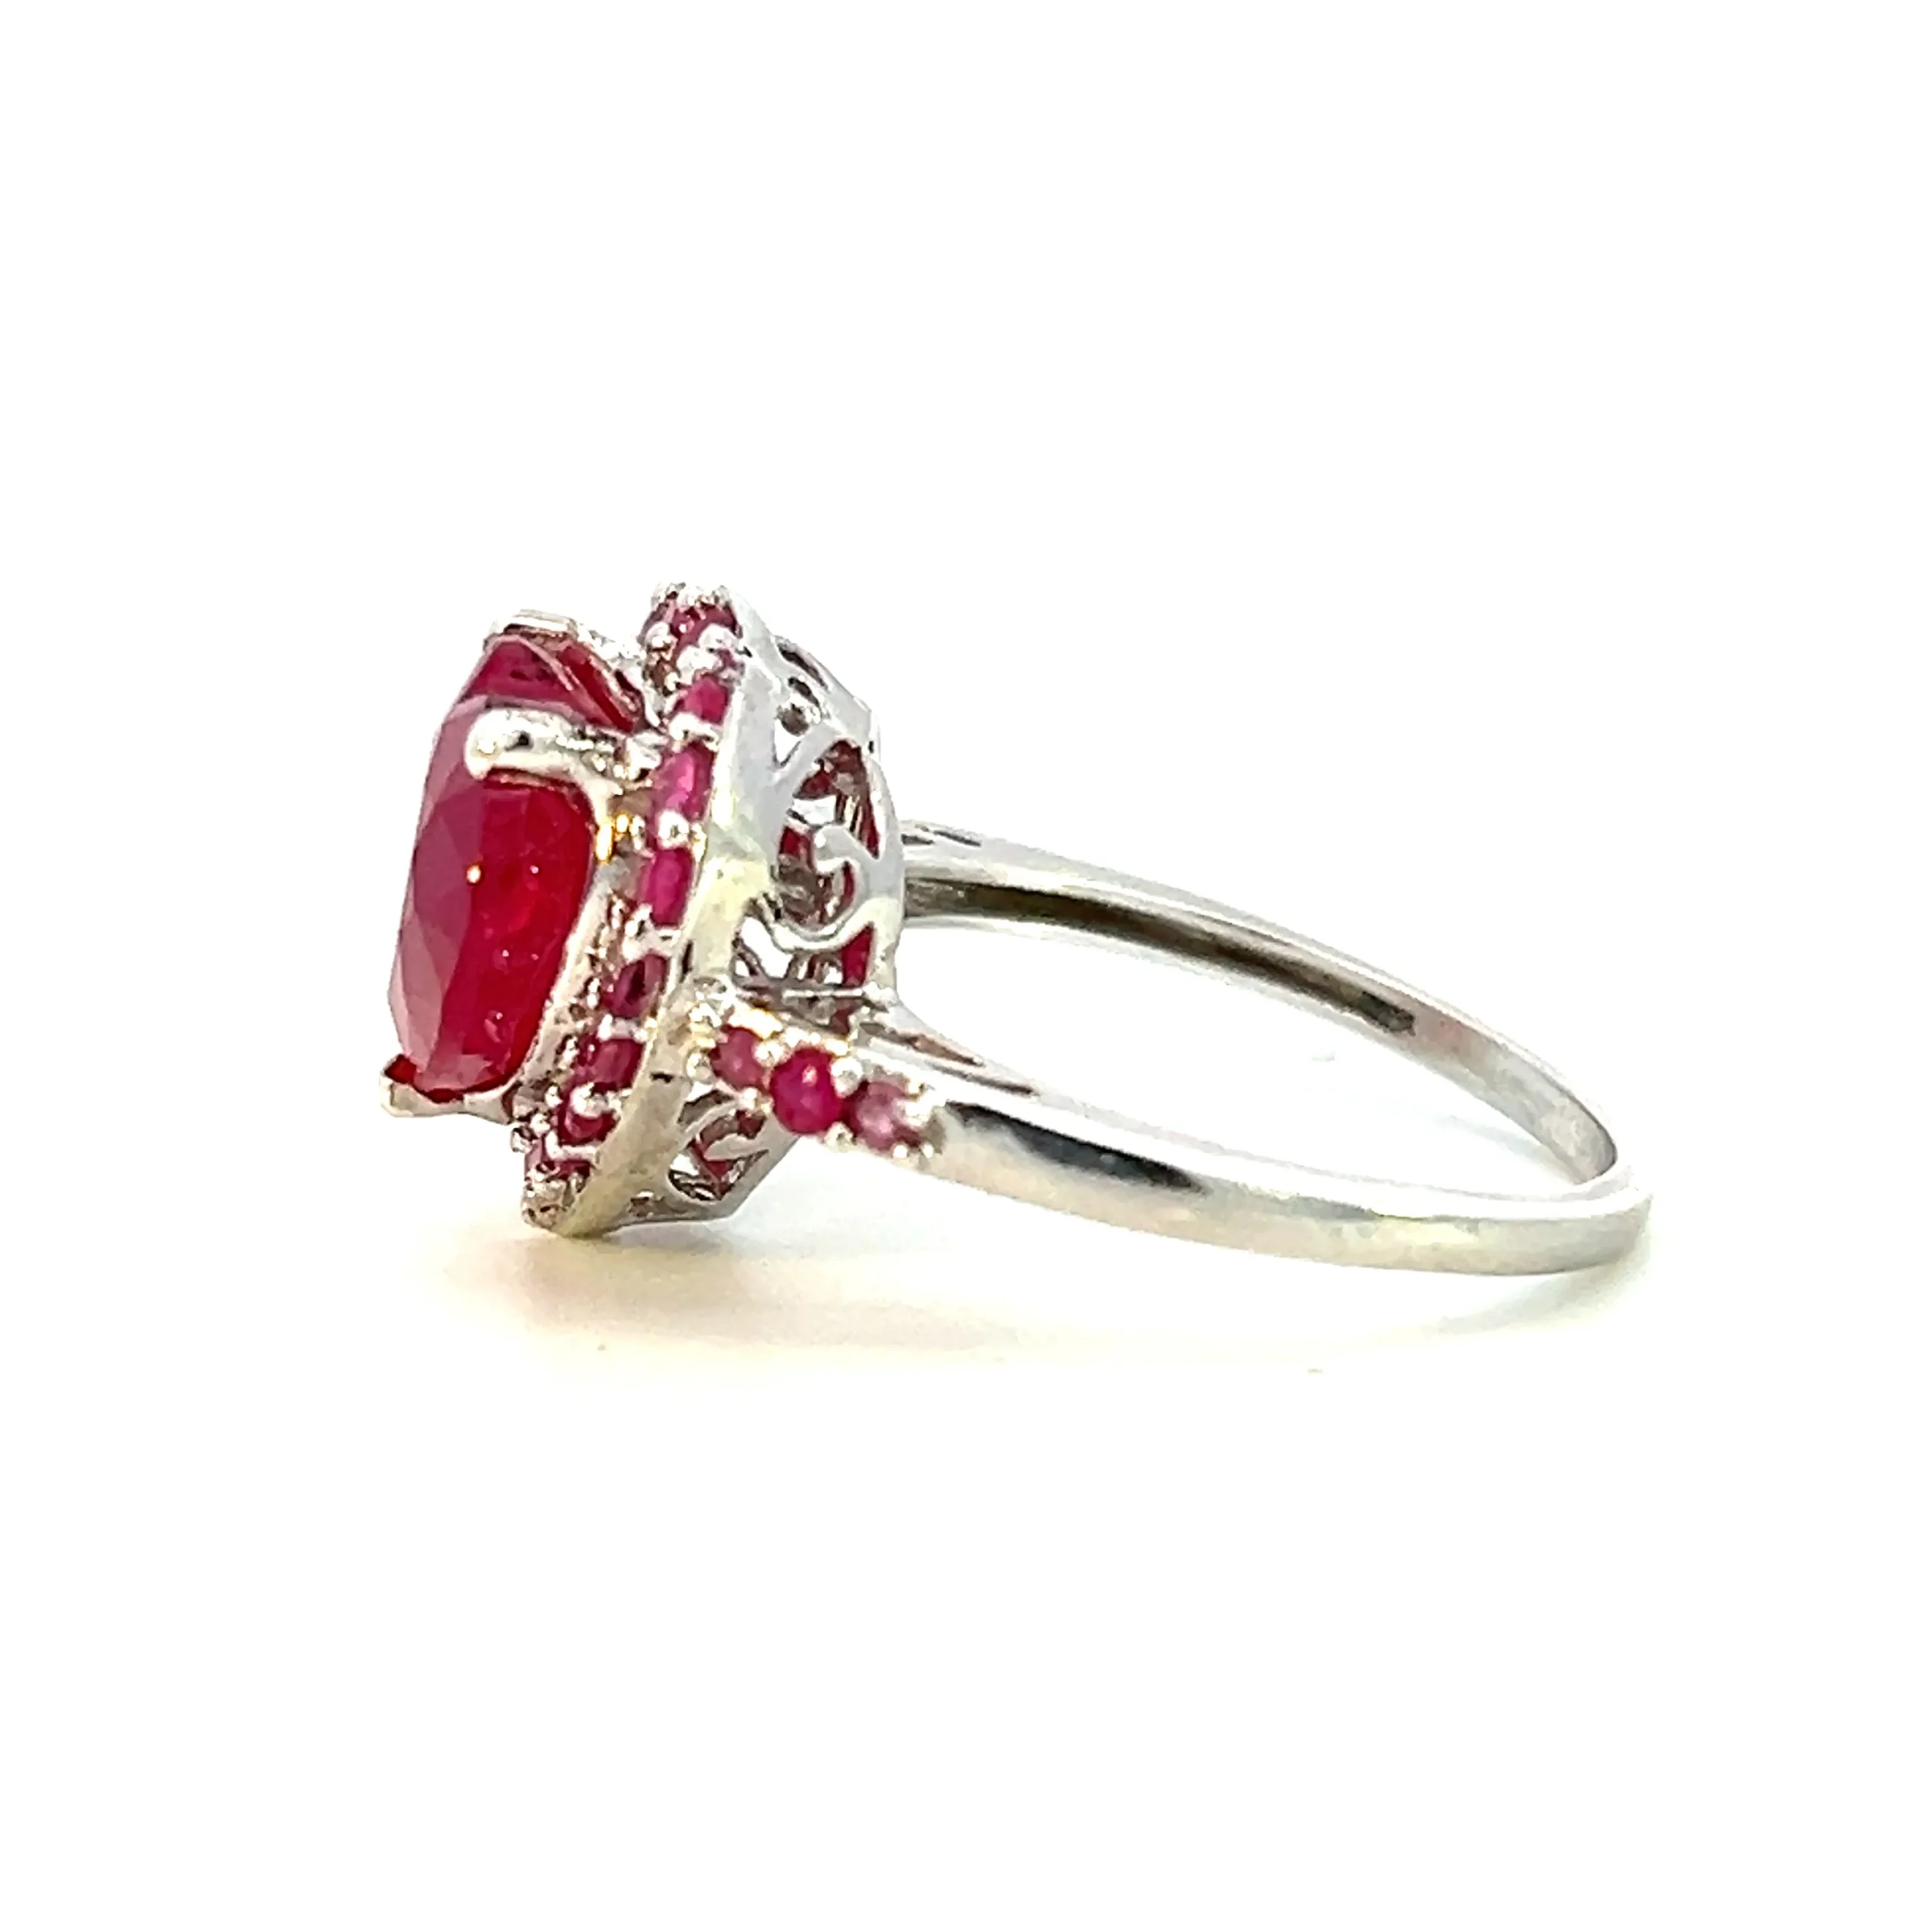 One Estate Lab-Created Ruby Heart Ring crafted from sterling silver containing a lab-created heart-shaped ruby surrounded by a halo of 20 lab-created round rubies with 6 lab-created round rubies in the shoulders. the center ruby measures 11.70x10mm and the round rubies measure 1.5mm.